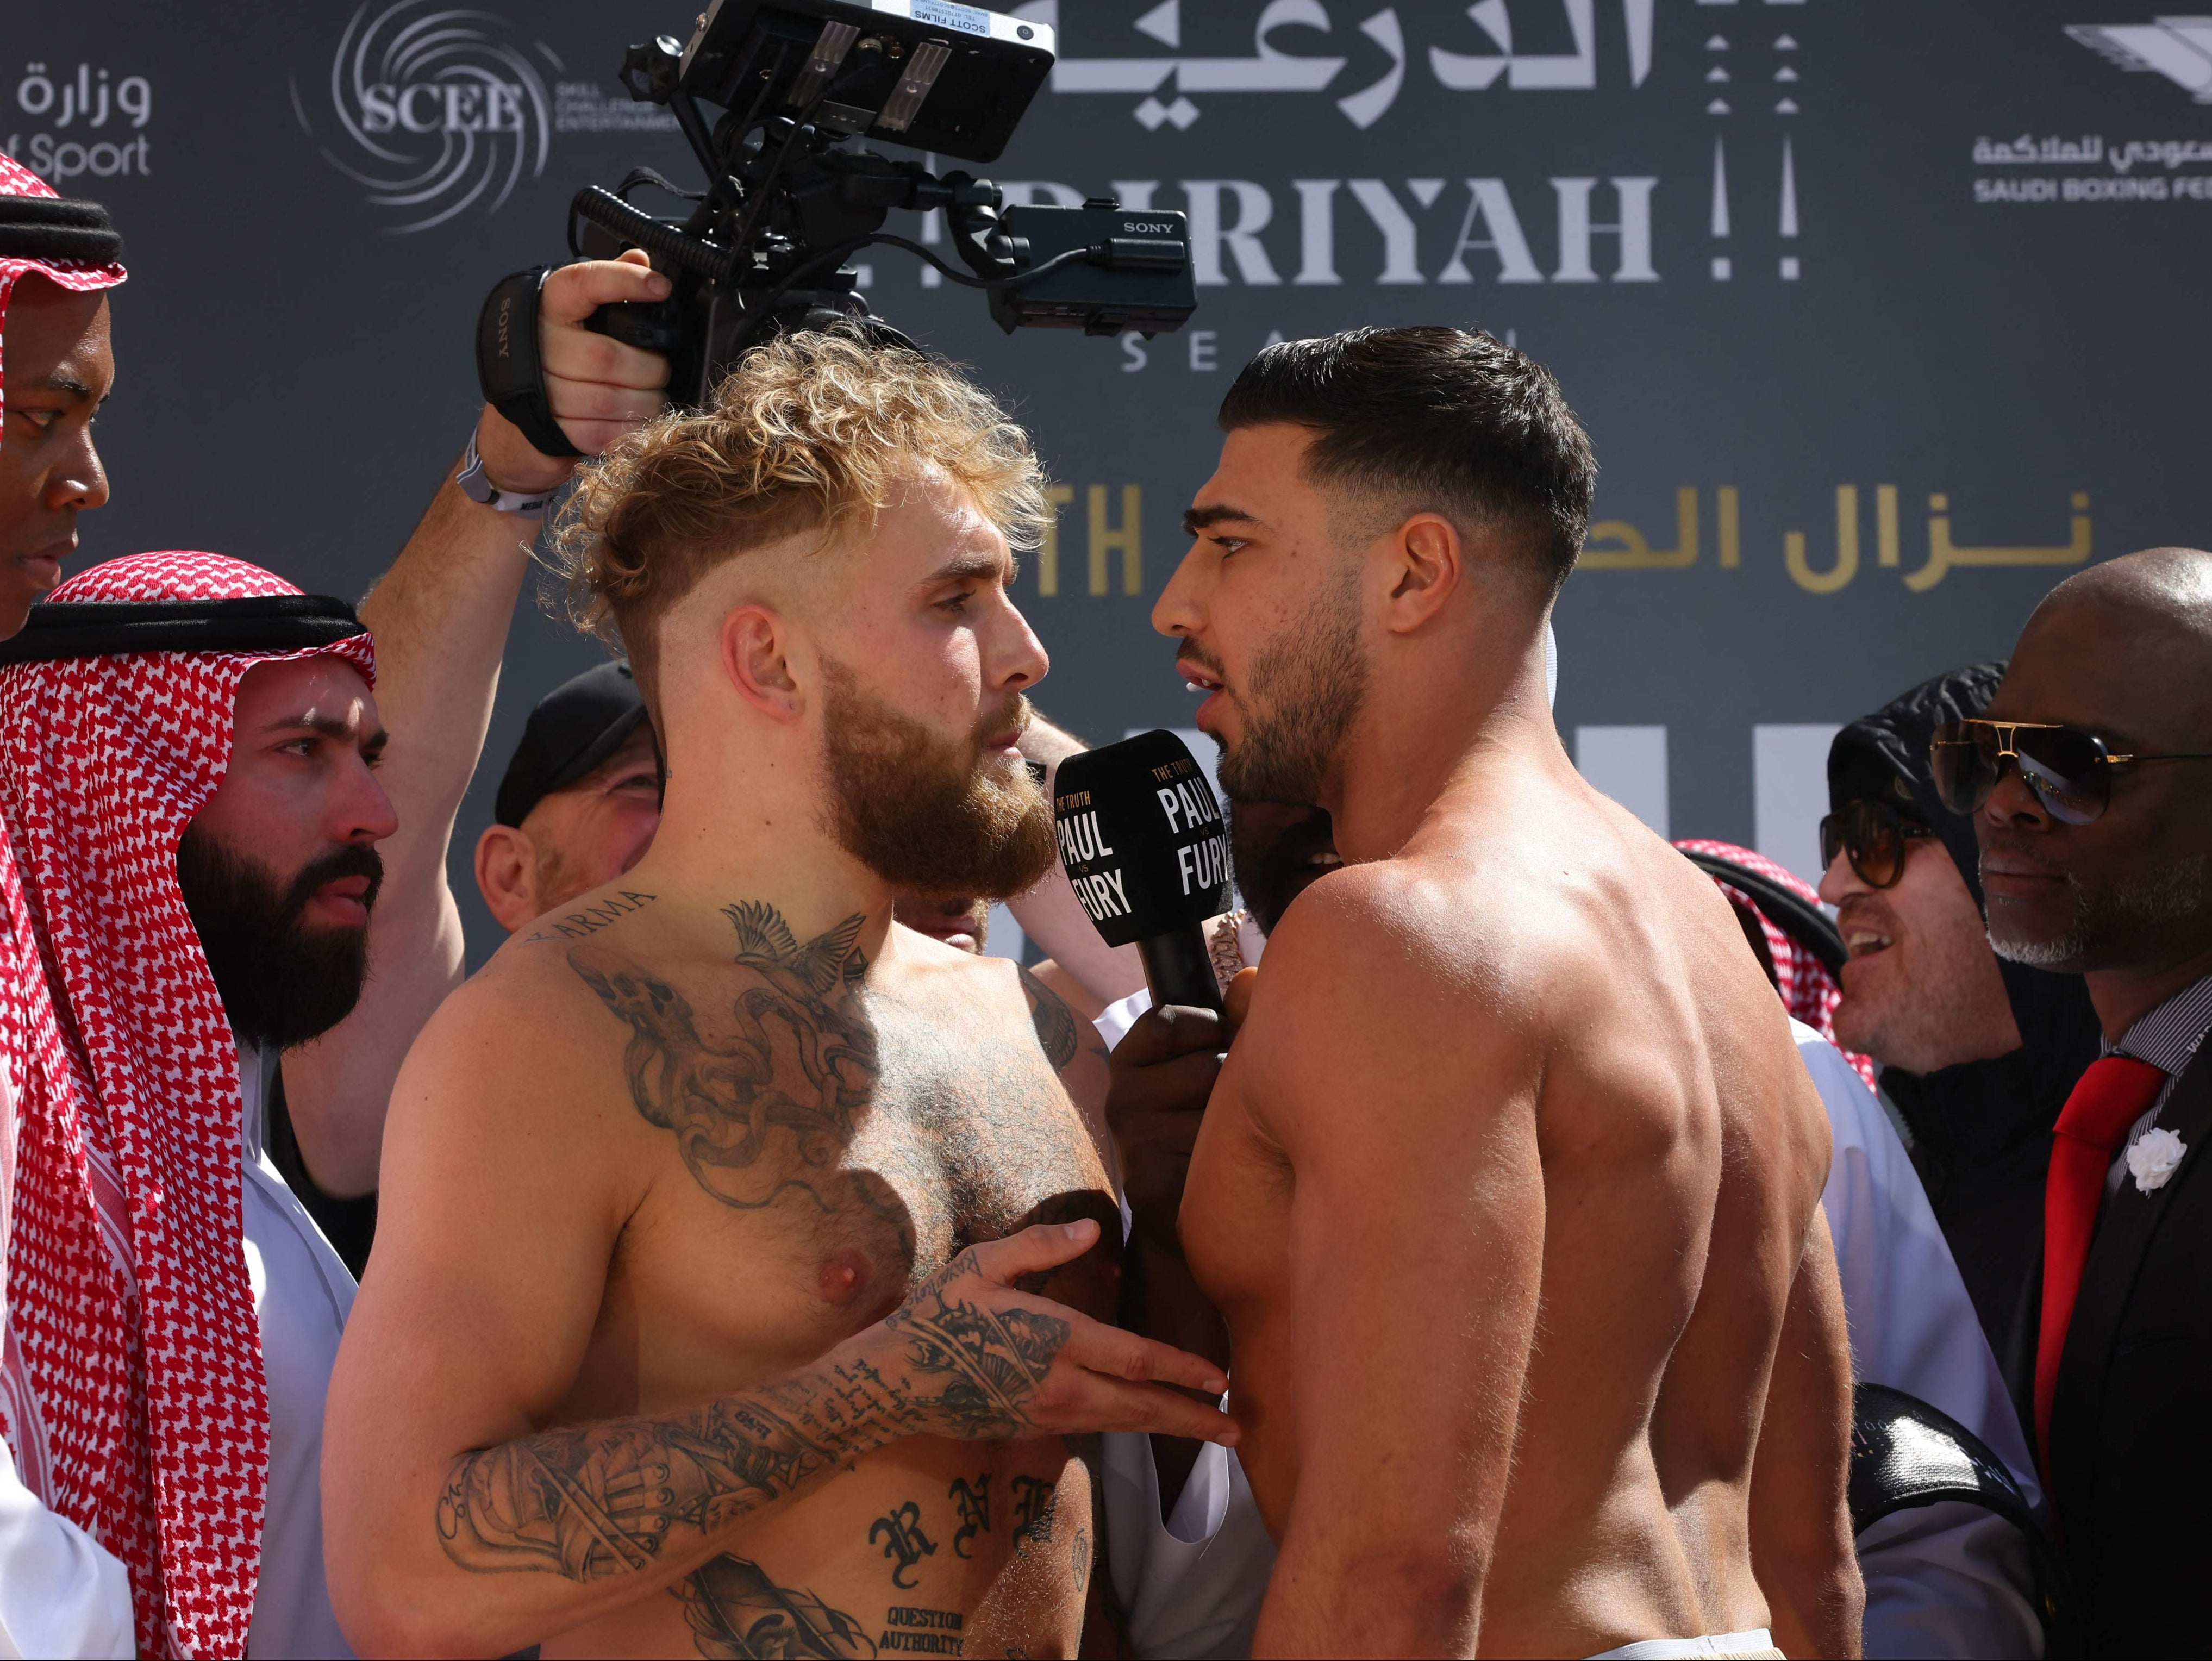 Jake Paul vs Tommy Fury live stream Free links to watch online spread despite risks The Independent